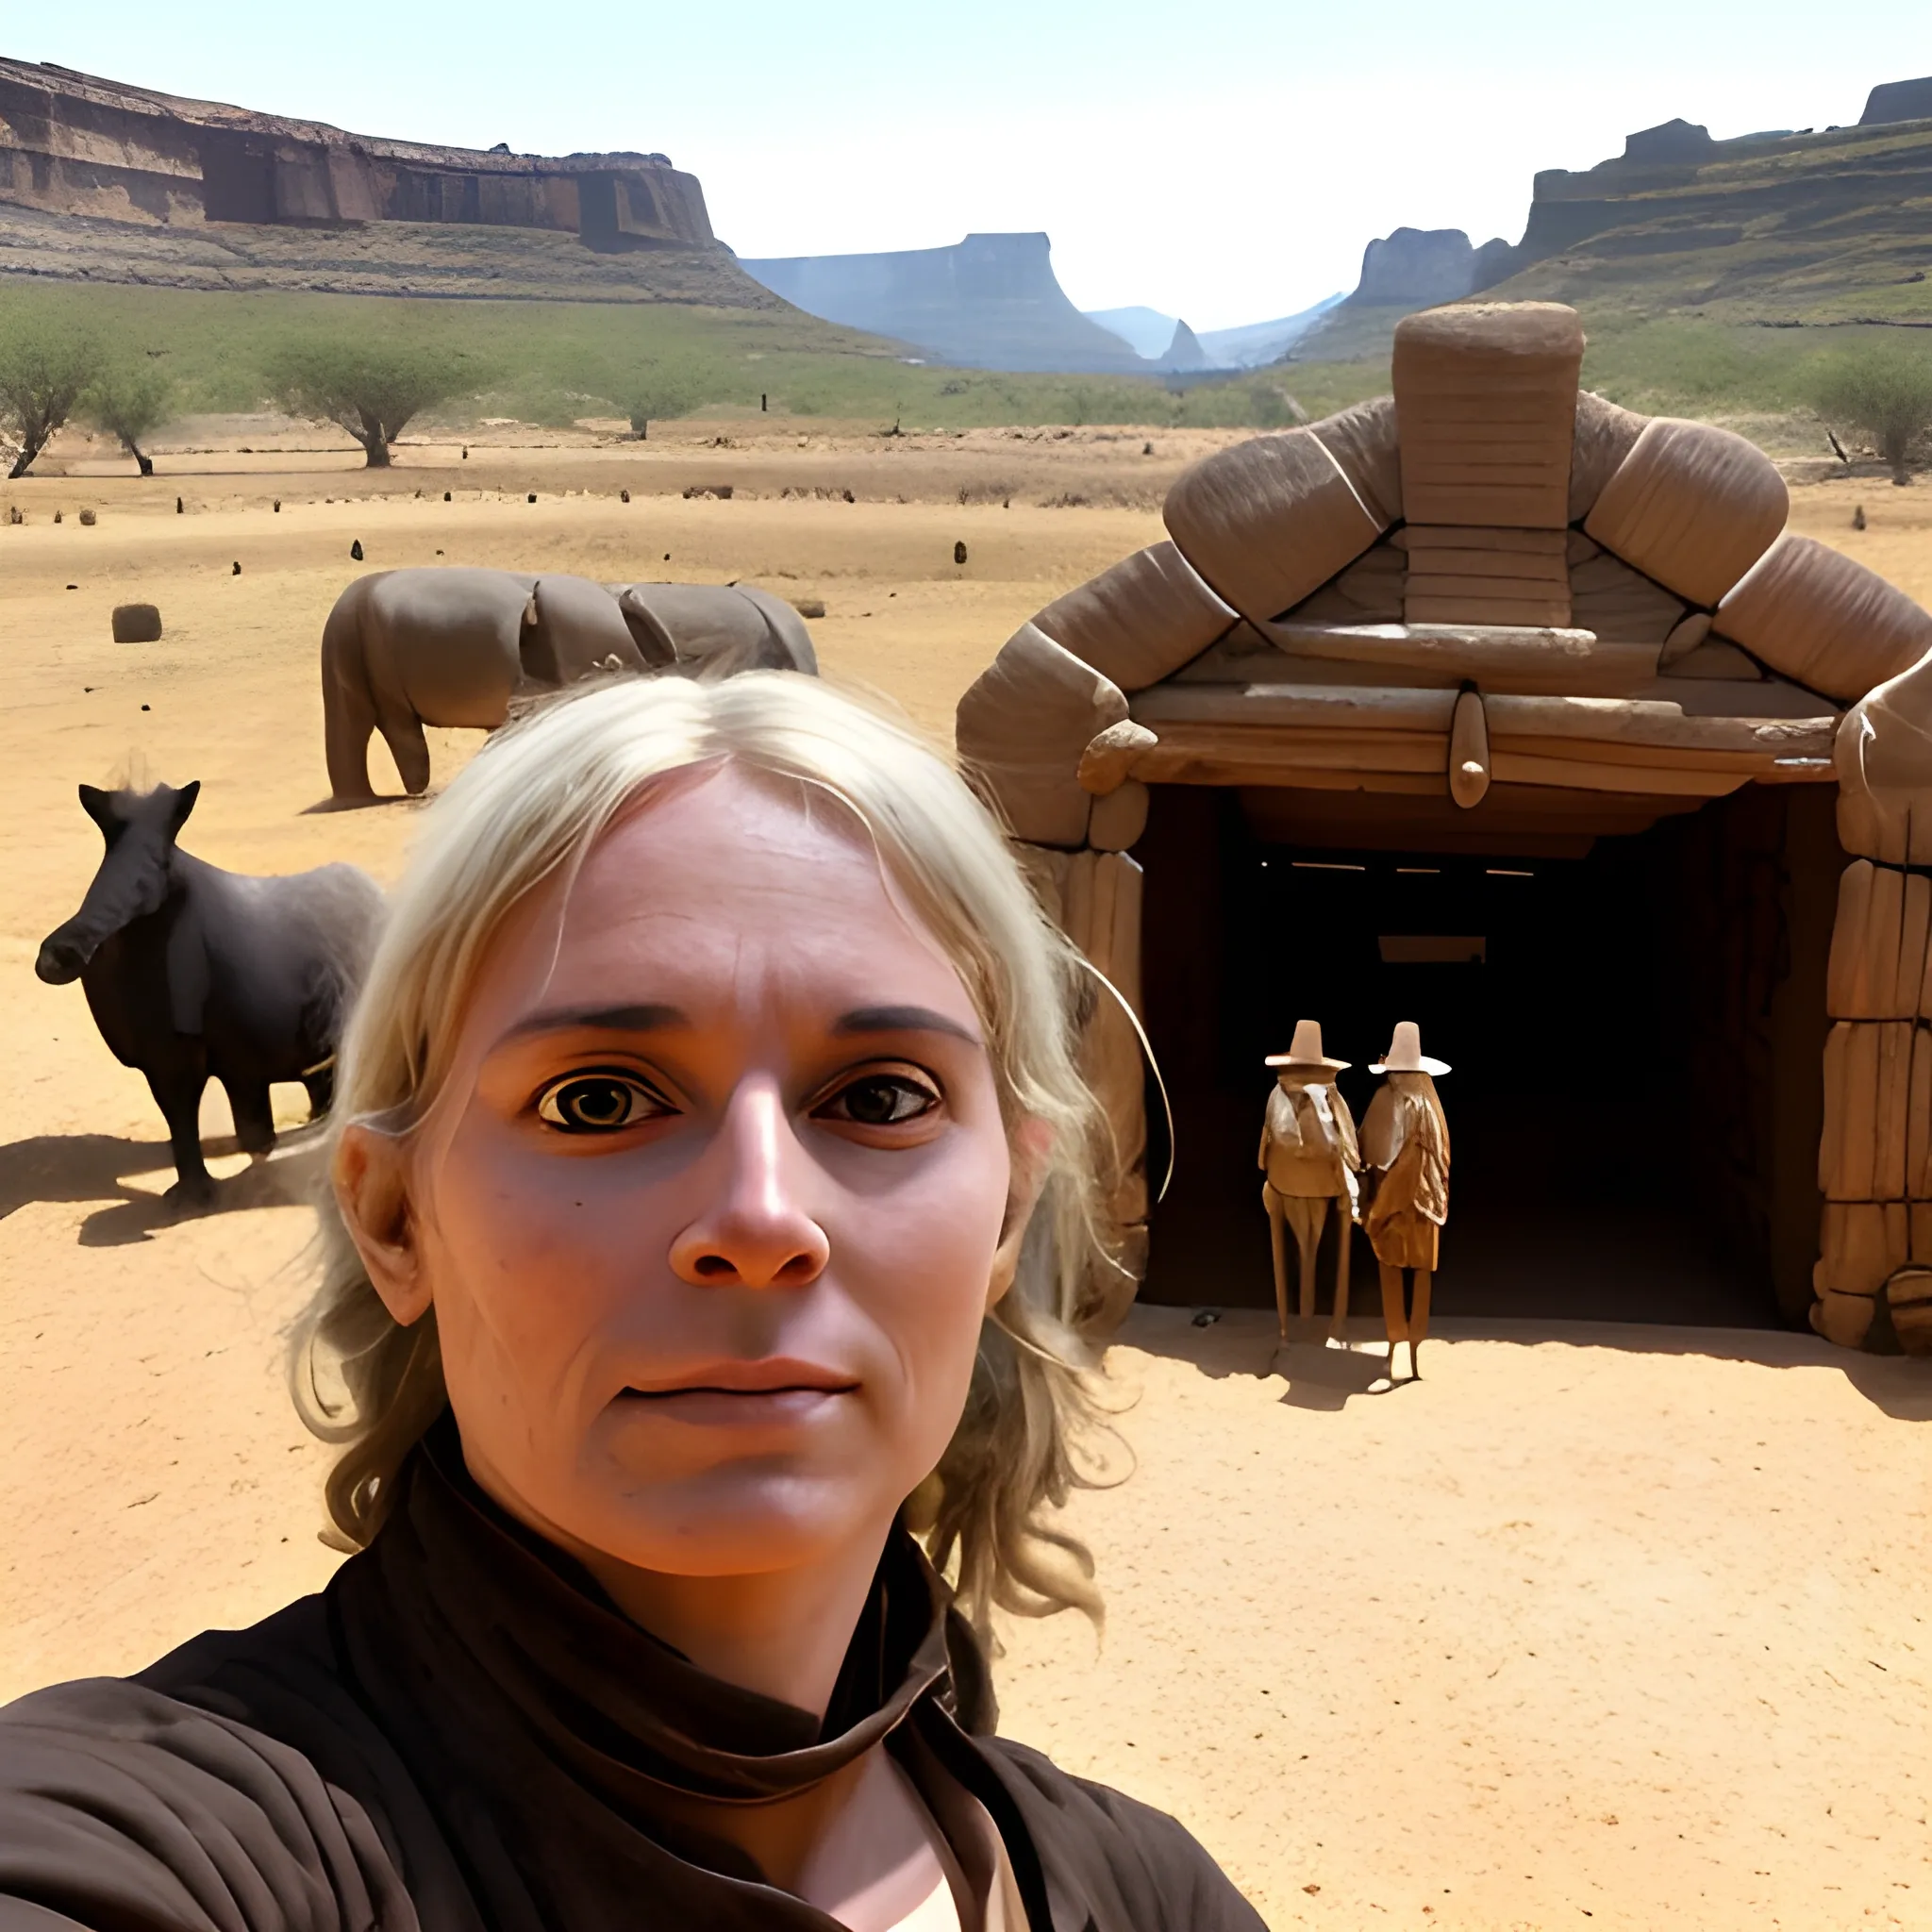 ancient western poeple selfie , with big ark at the background and many animals